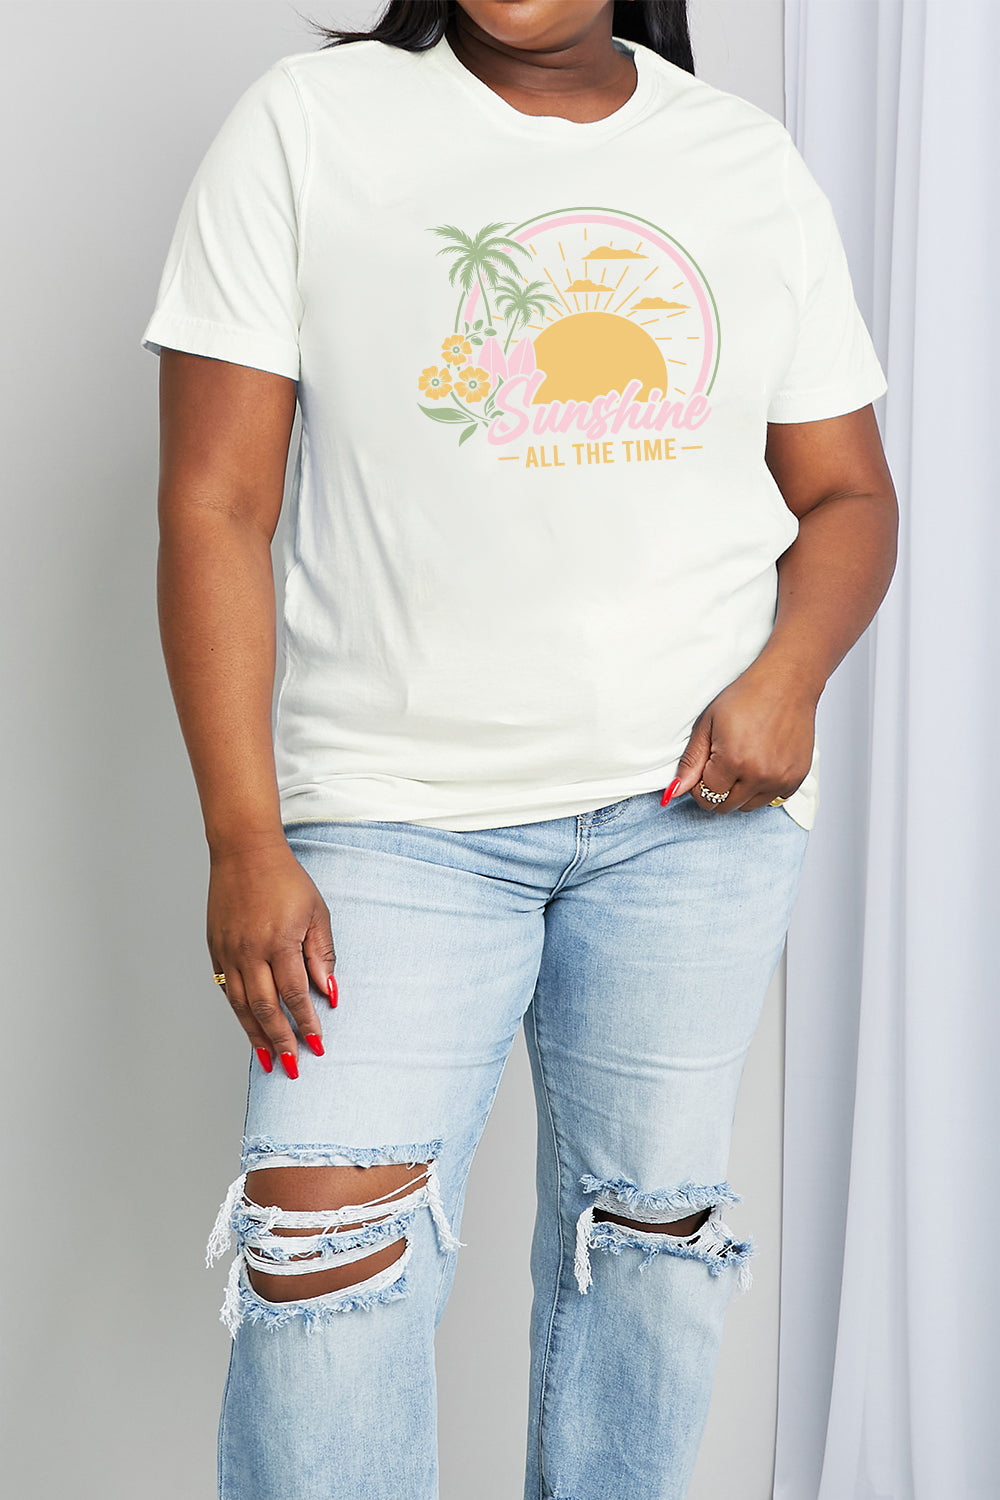 Full Size SUNSHINE ALL THE TIME Graphic Cotton Tee